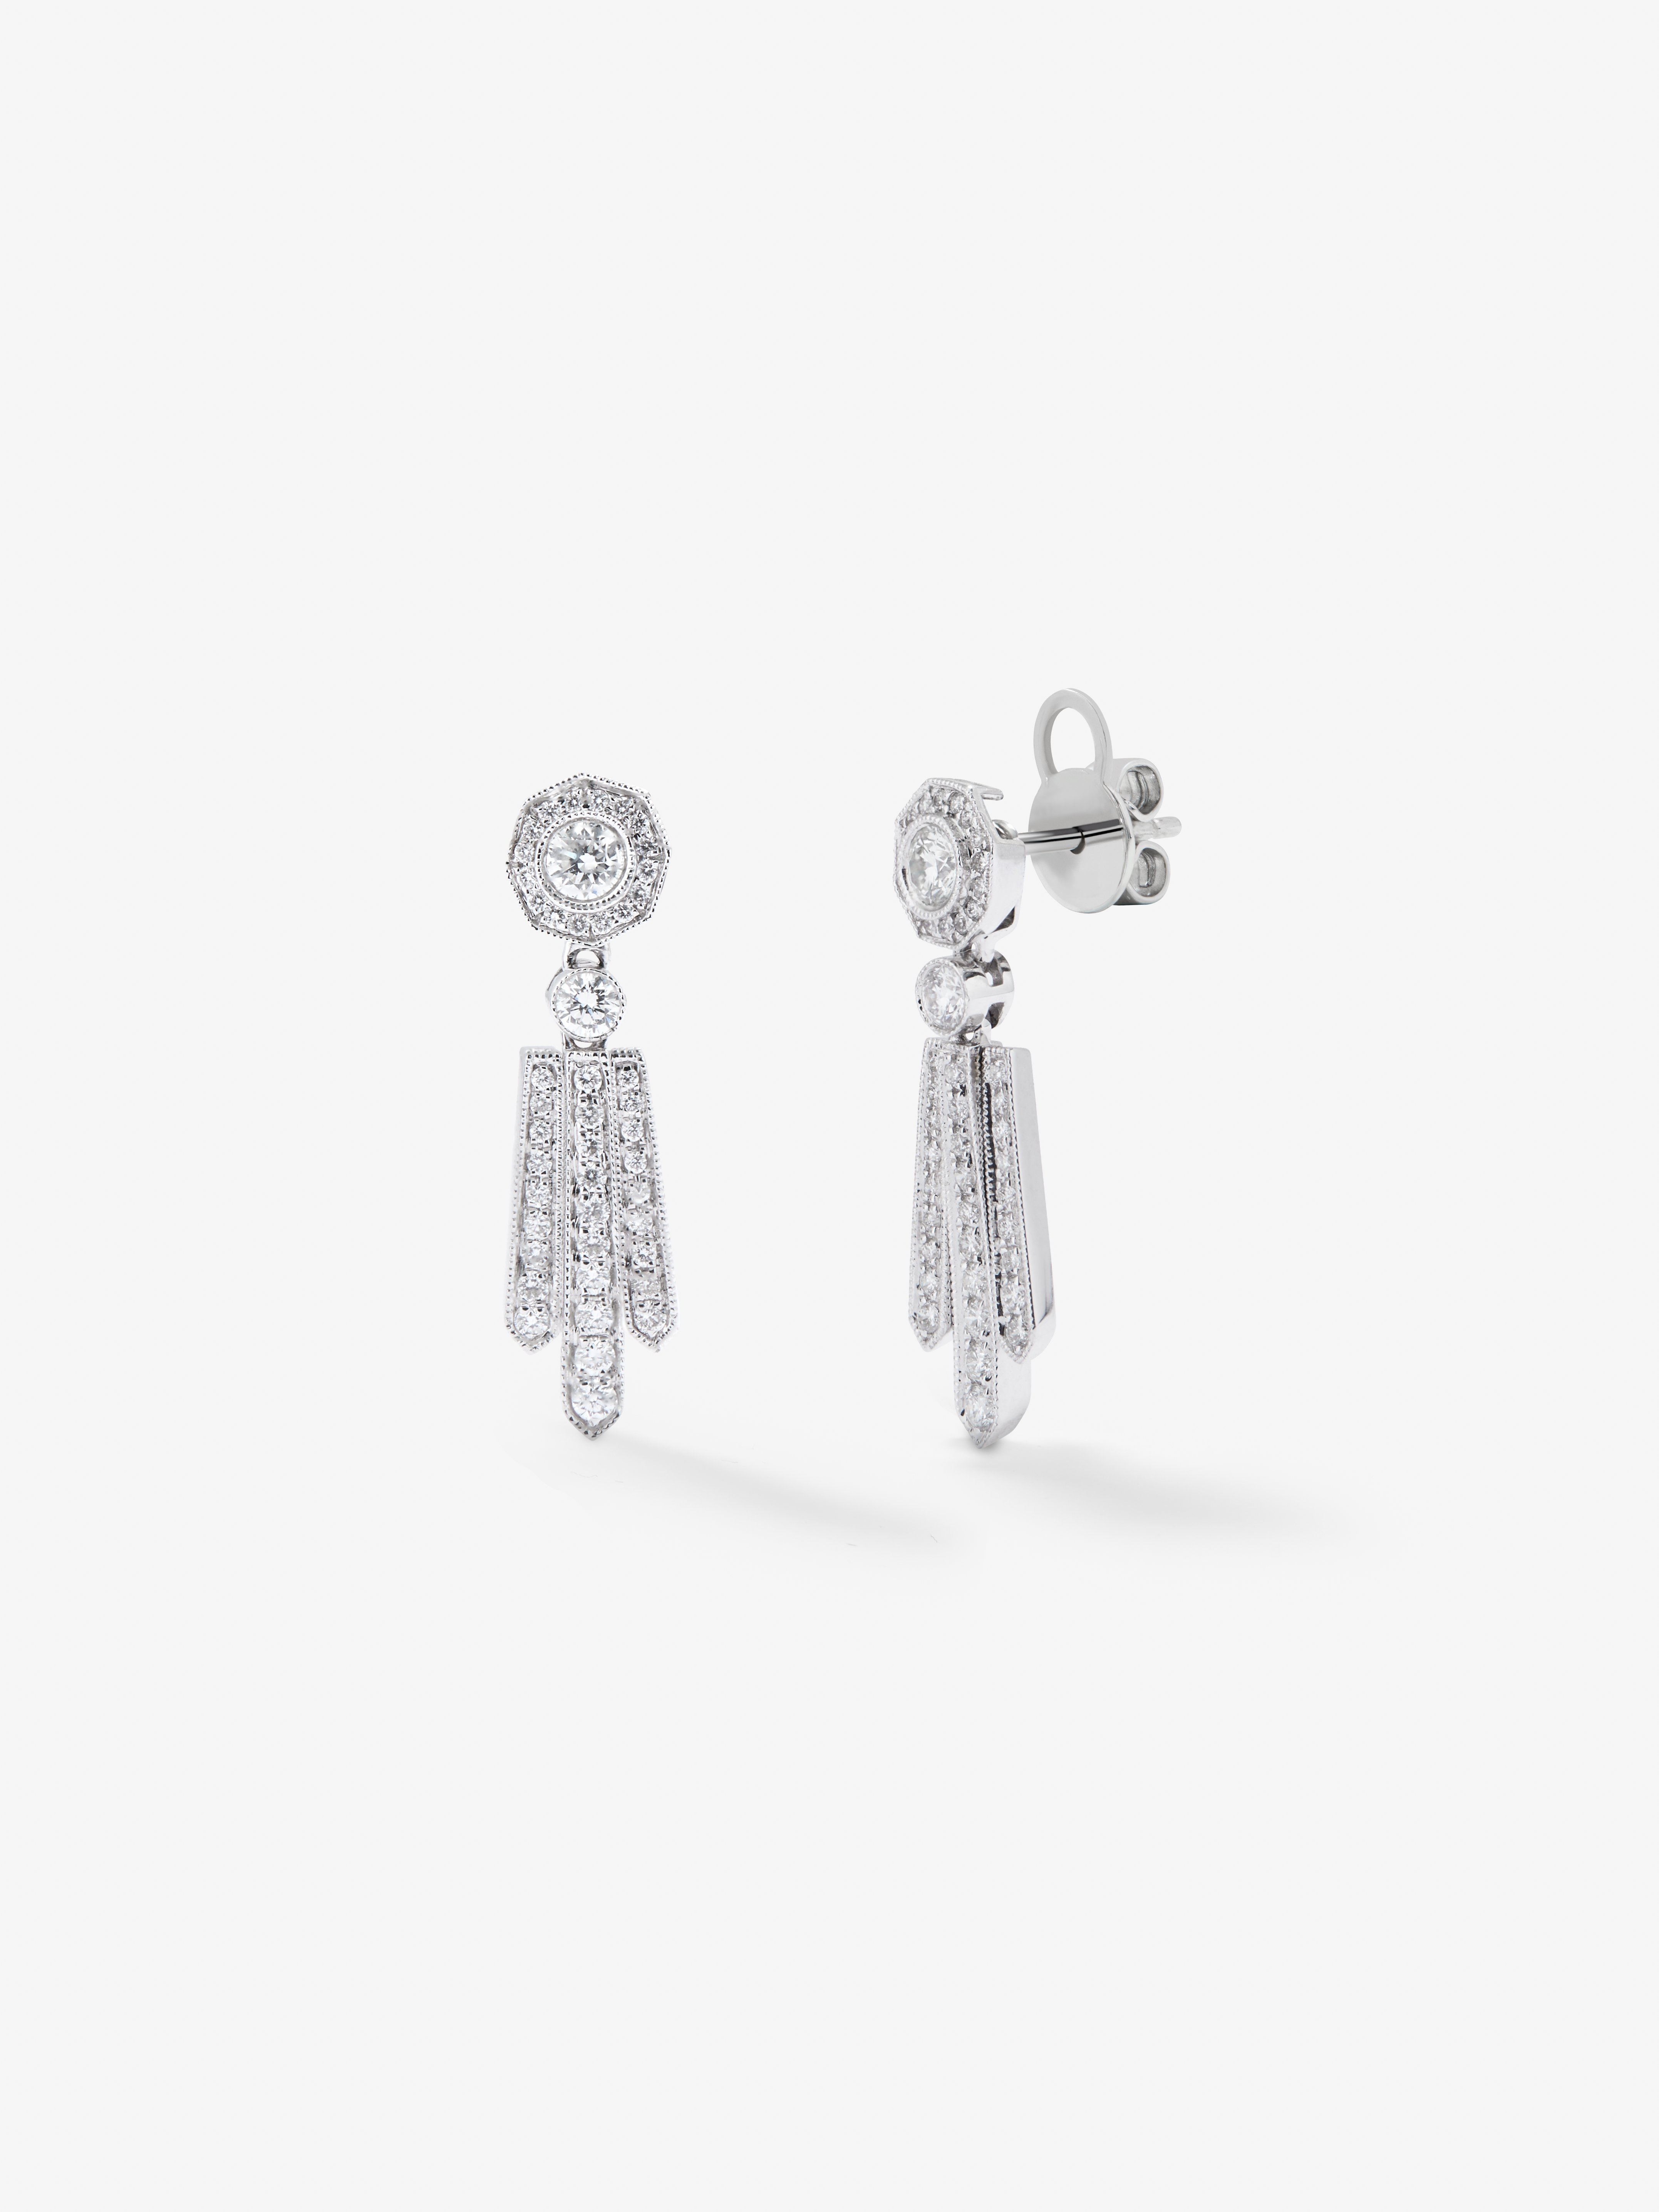 18K white gold earrings with white diamonds of 0.88 cts